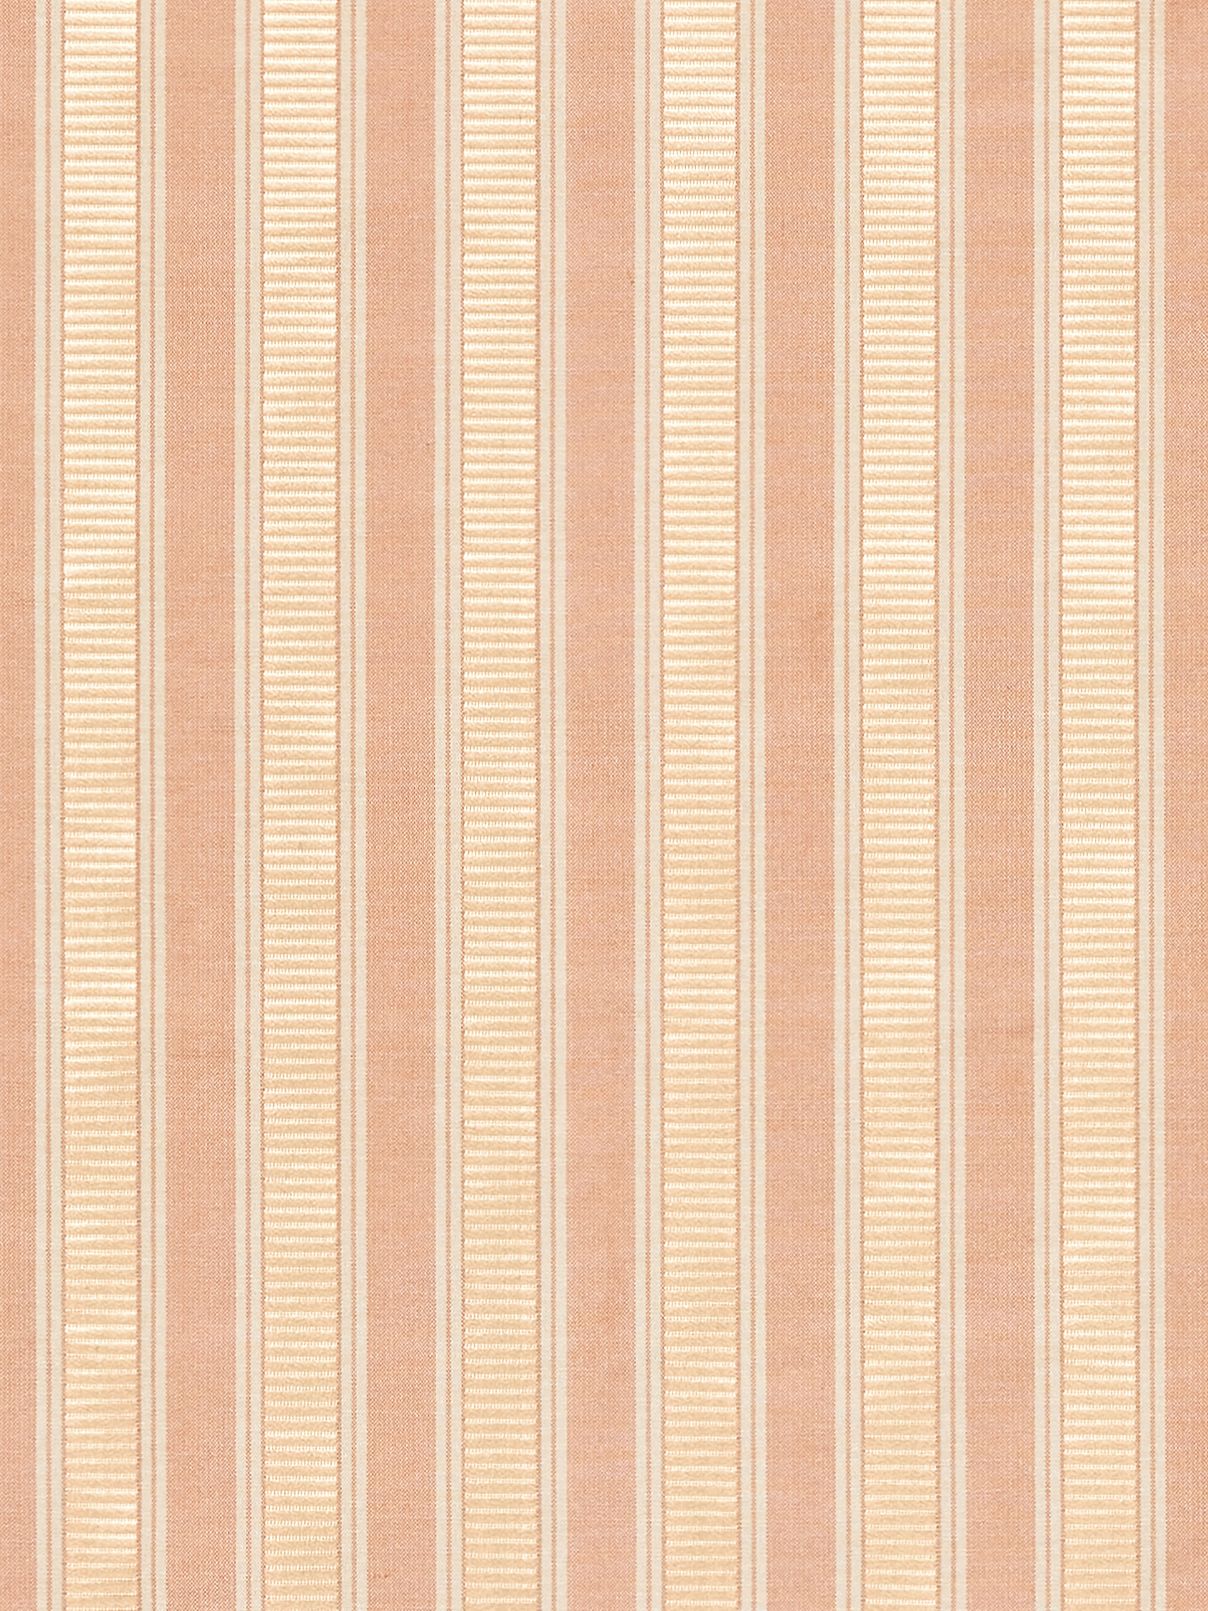 Shirred Stripe fabric in peach and beige color - pattern number SC 0001121M - by Scalamandre in the Scalamandre Fabrics Book 1 collection